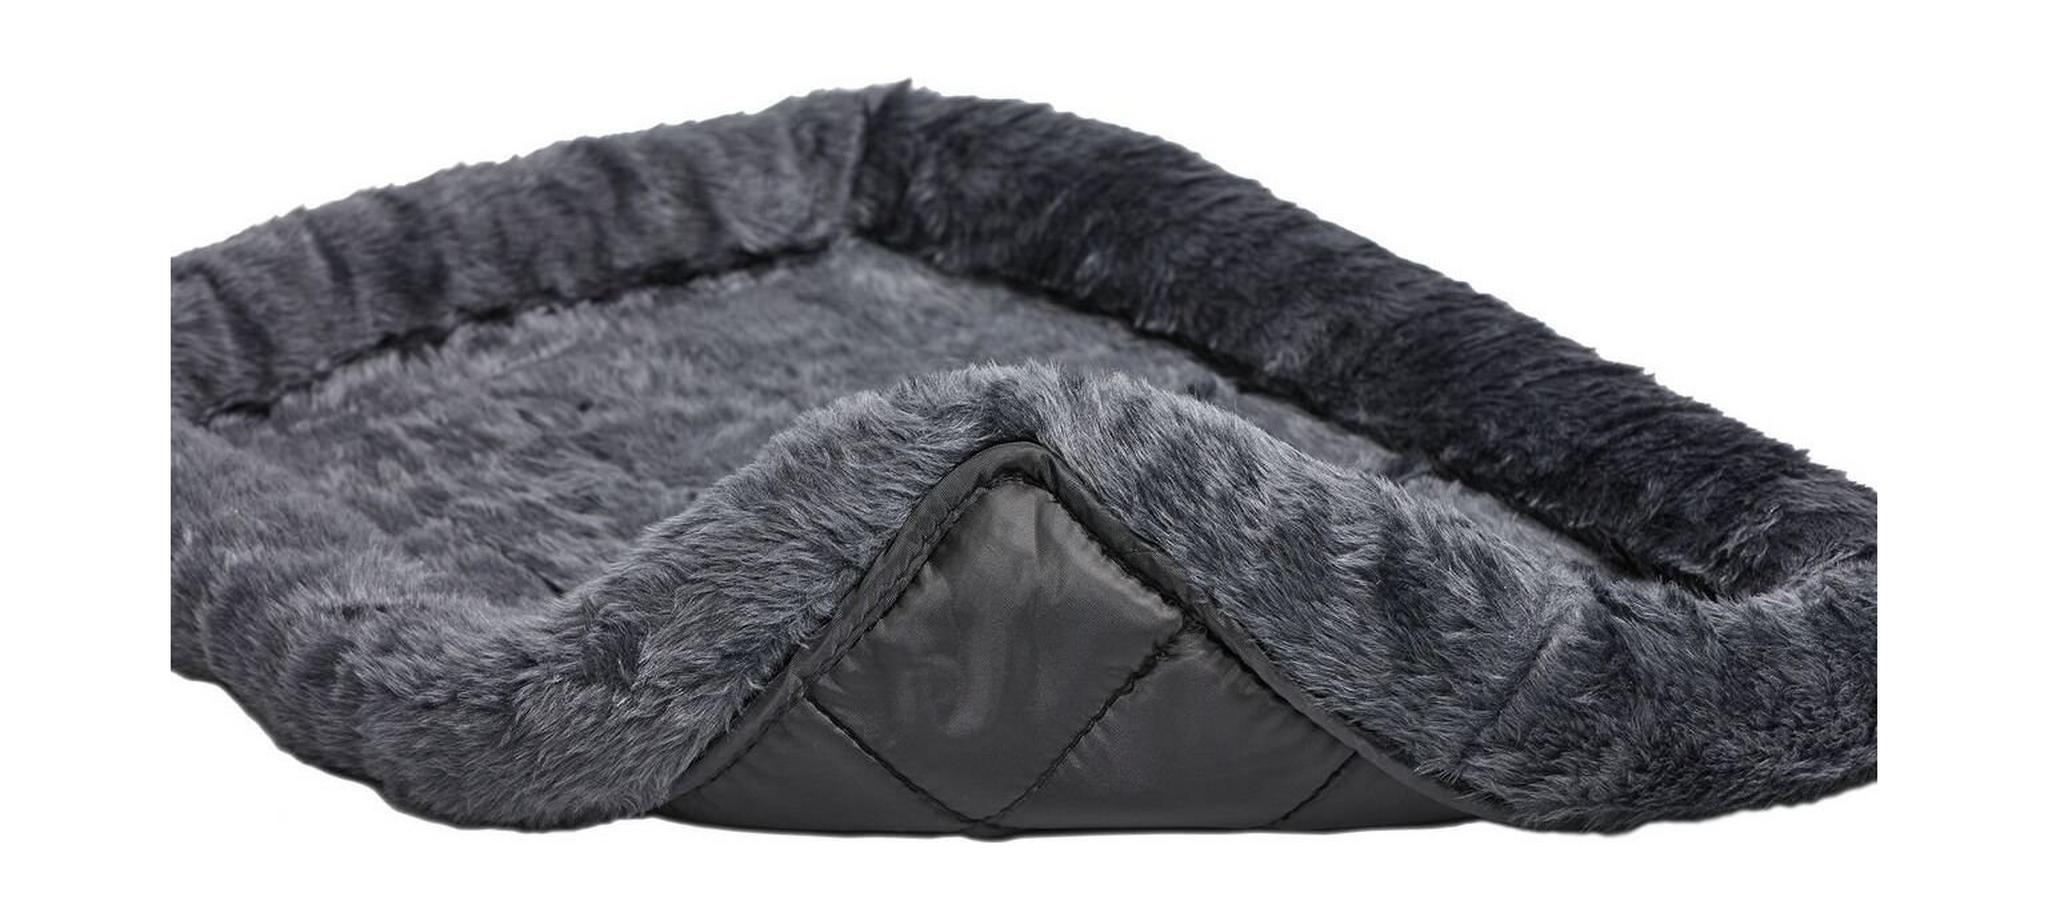 Medwest Quiet Time Pet Bed, 48-Inch x 30-Inch - Gray